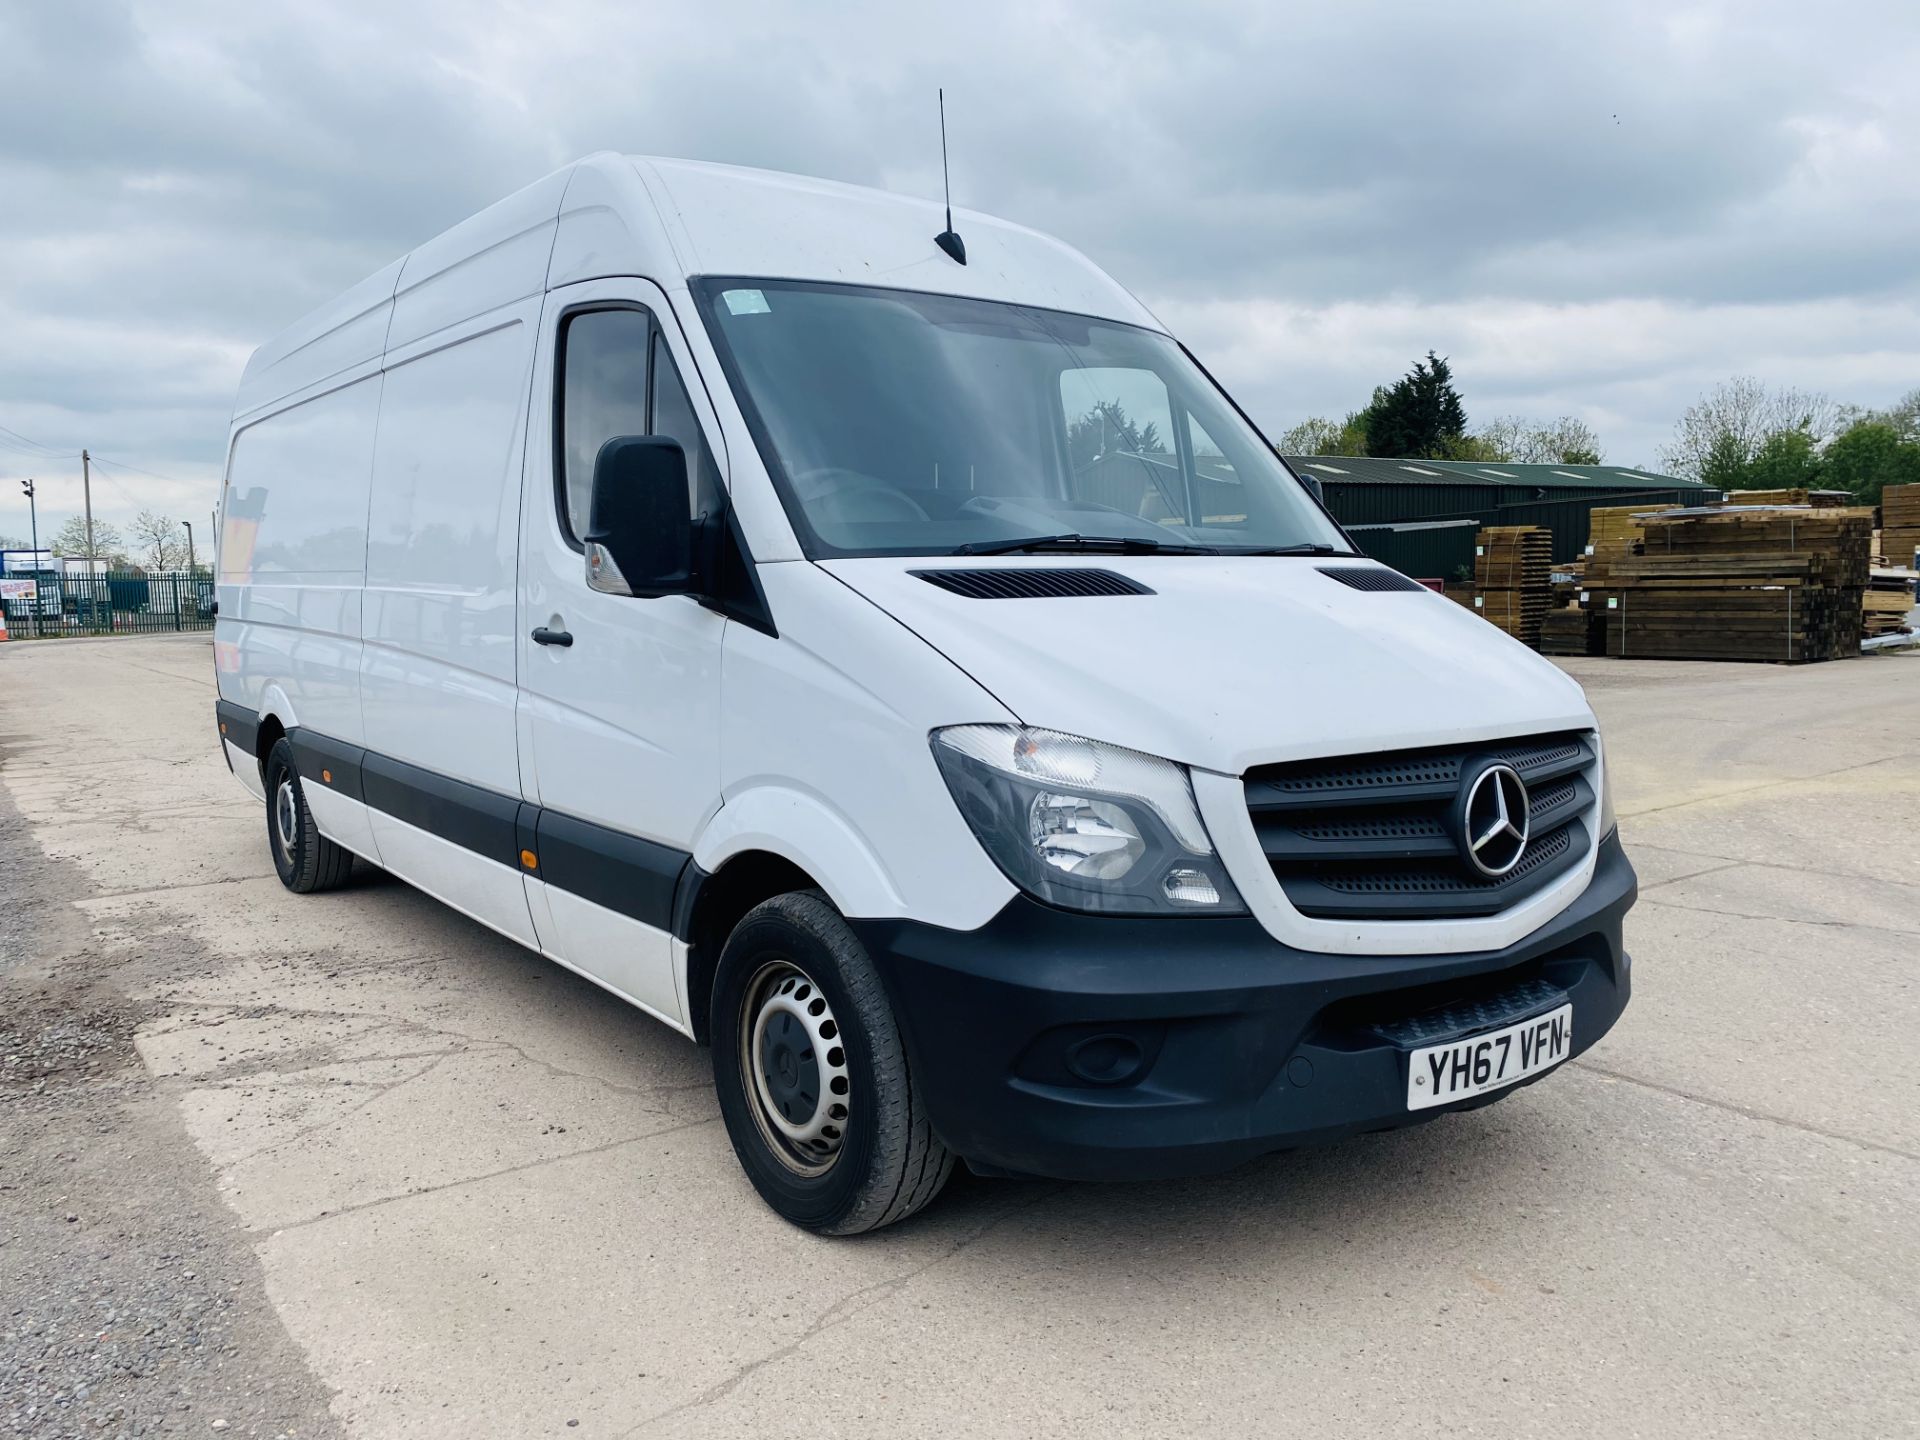 MERCEDES SPRINTER 314CDI "LWB" HIGH ROOF WITH FULL ELECTRIC TAIL-LIFT - 2018 MODEL - 1 OWNER - FSH - Image 2 of 18